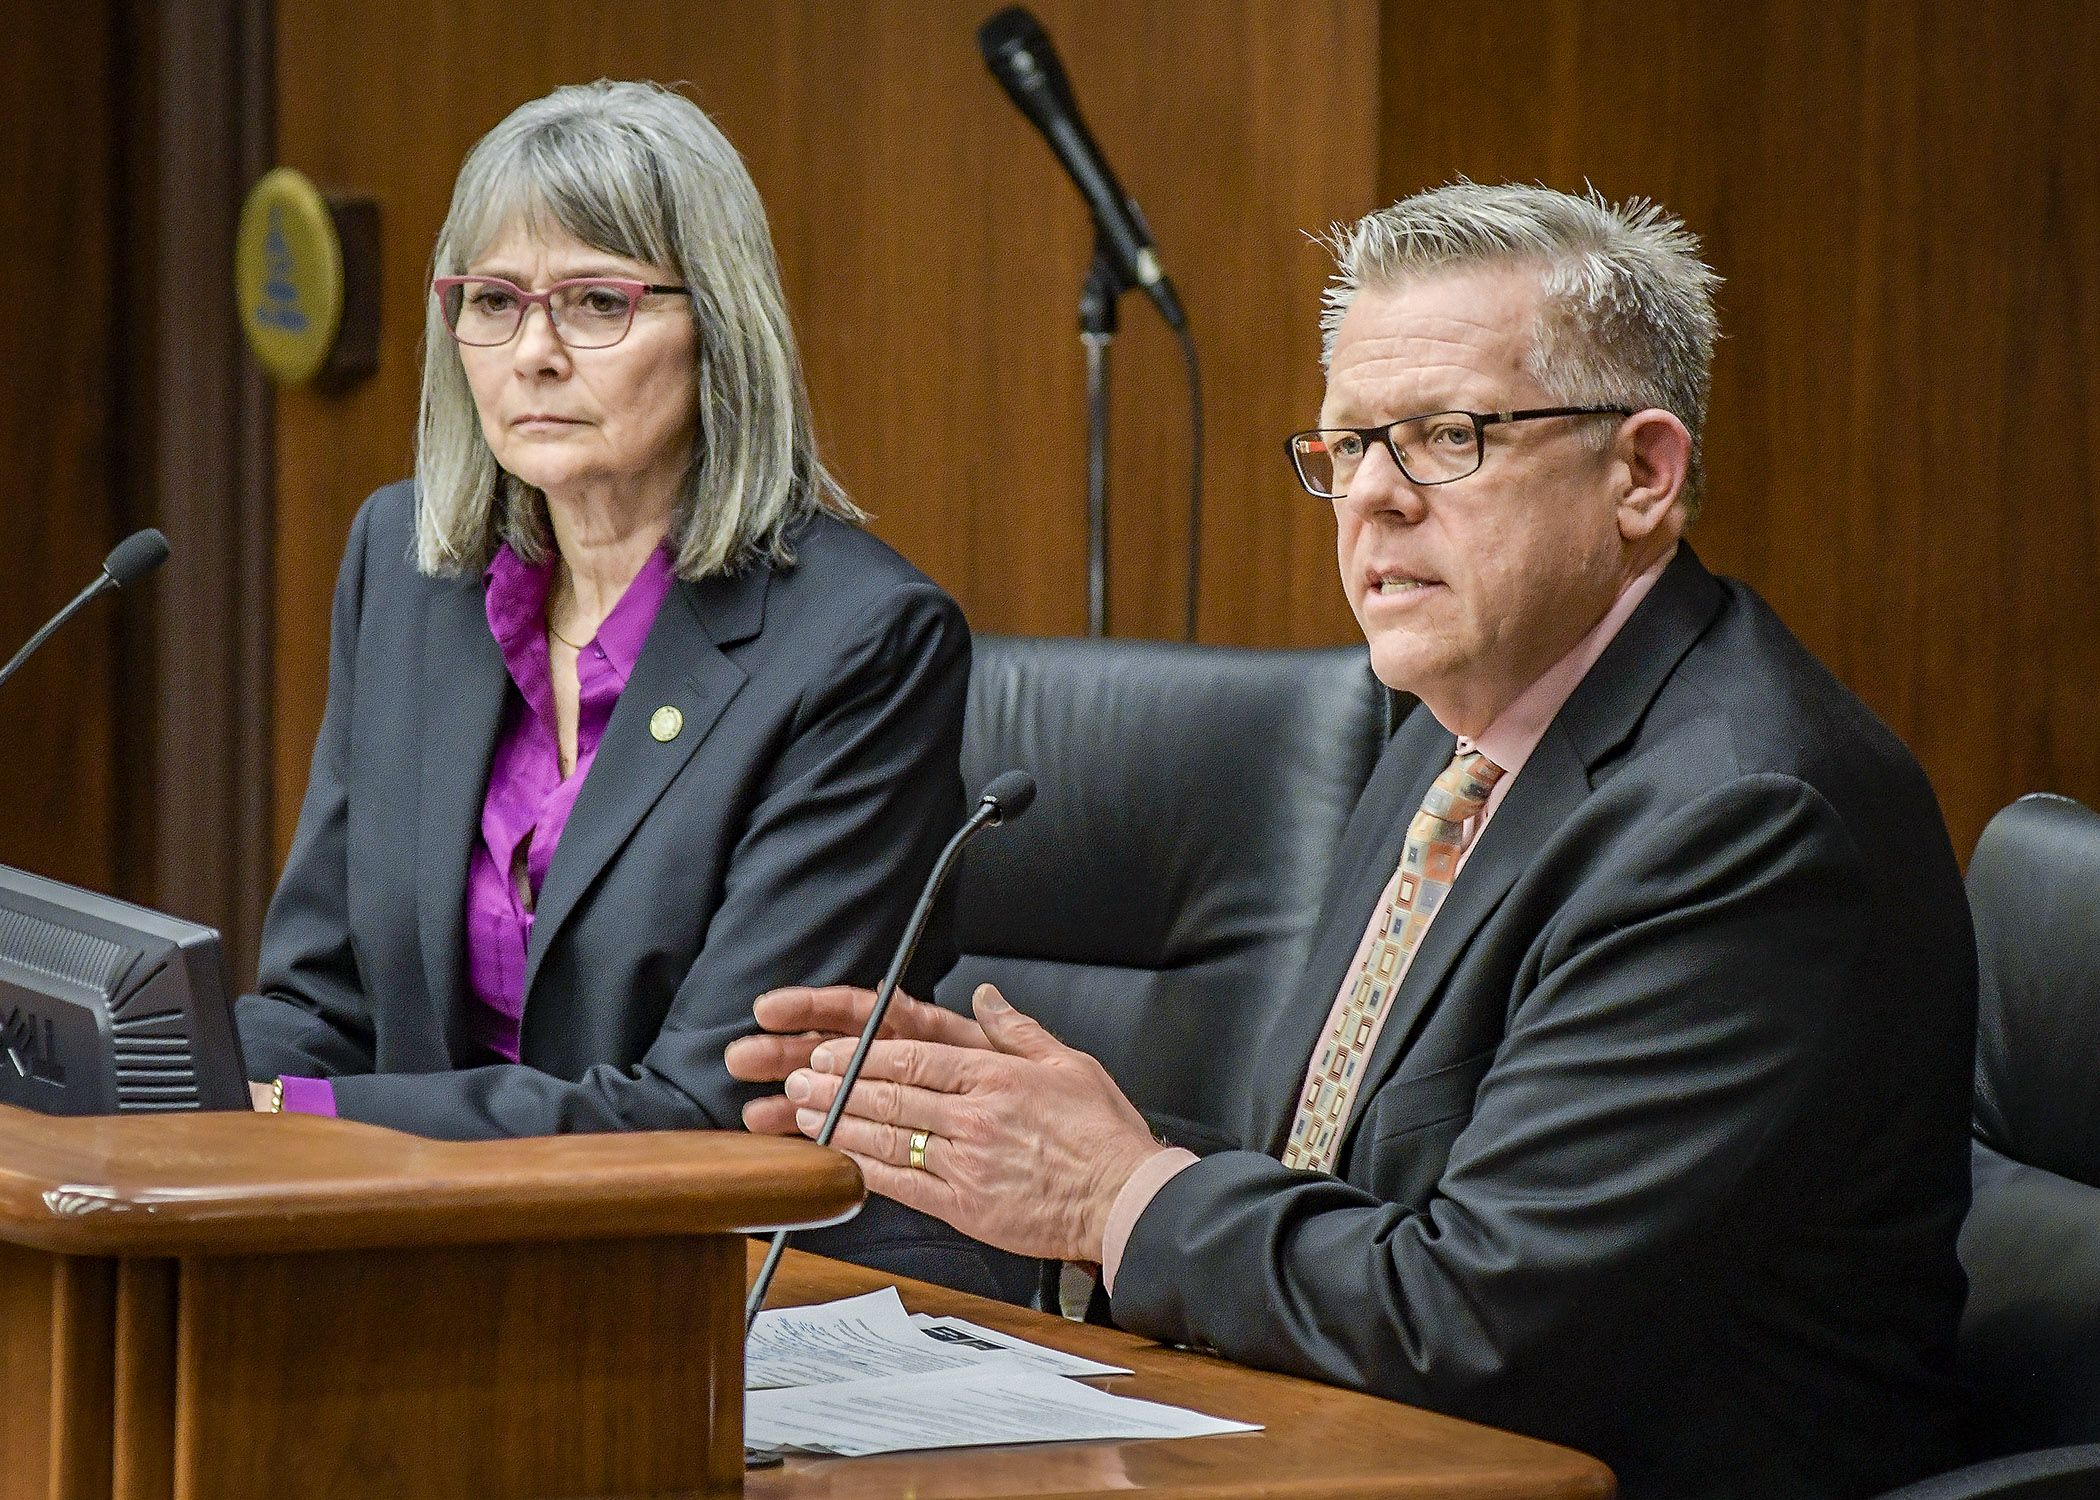 Steve Morse, executive director for Minnesota Environmental Partnership, testifies before the House Environment and Natural Resources Finance Division March 14 in support of a bill sponsored by Rep. Ginny Klevorn, left. Photo by Paul Battaglia